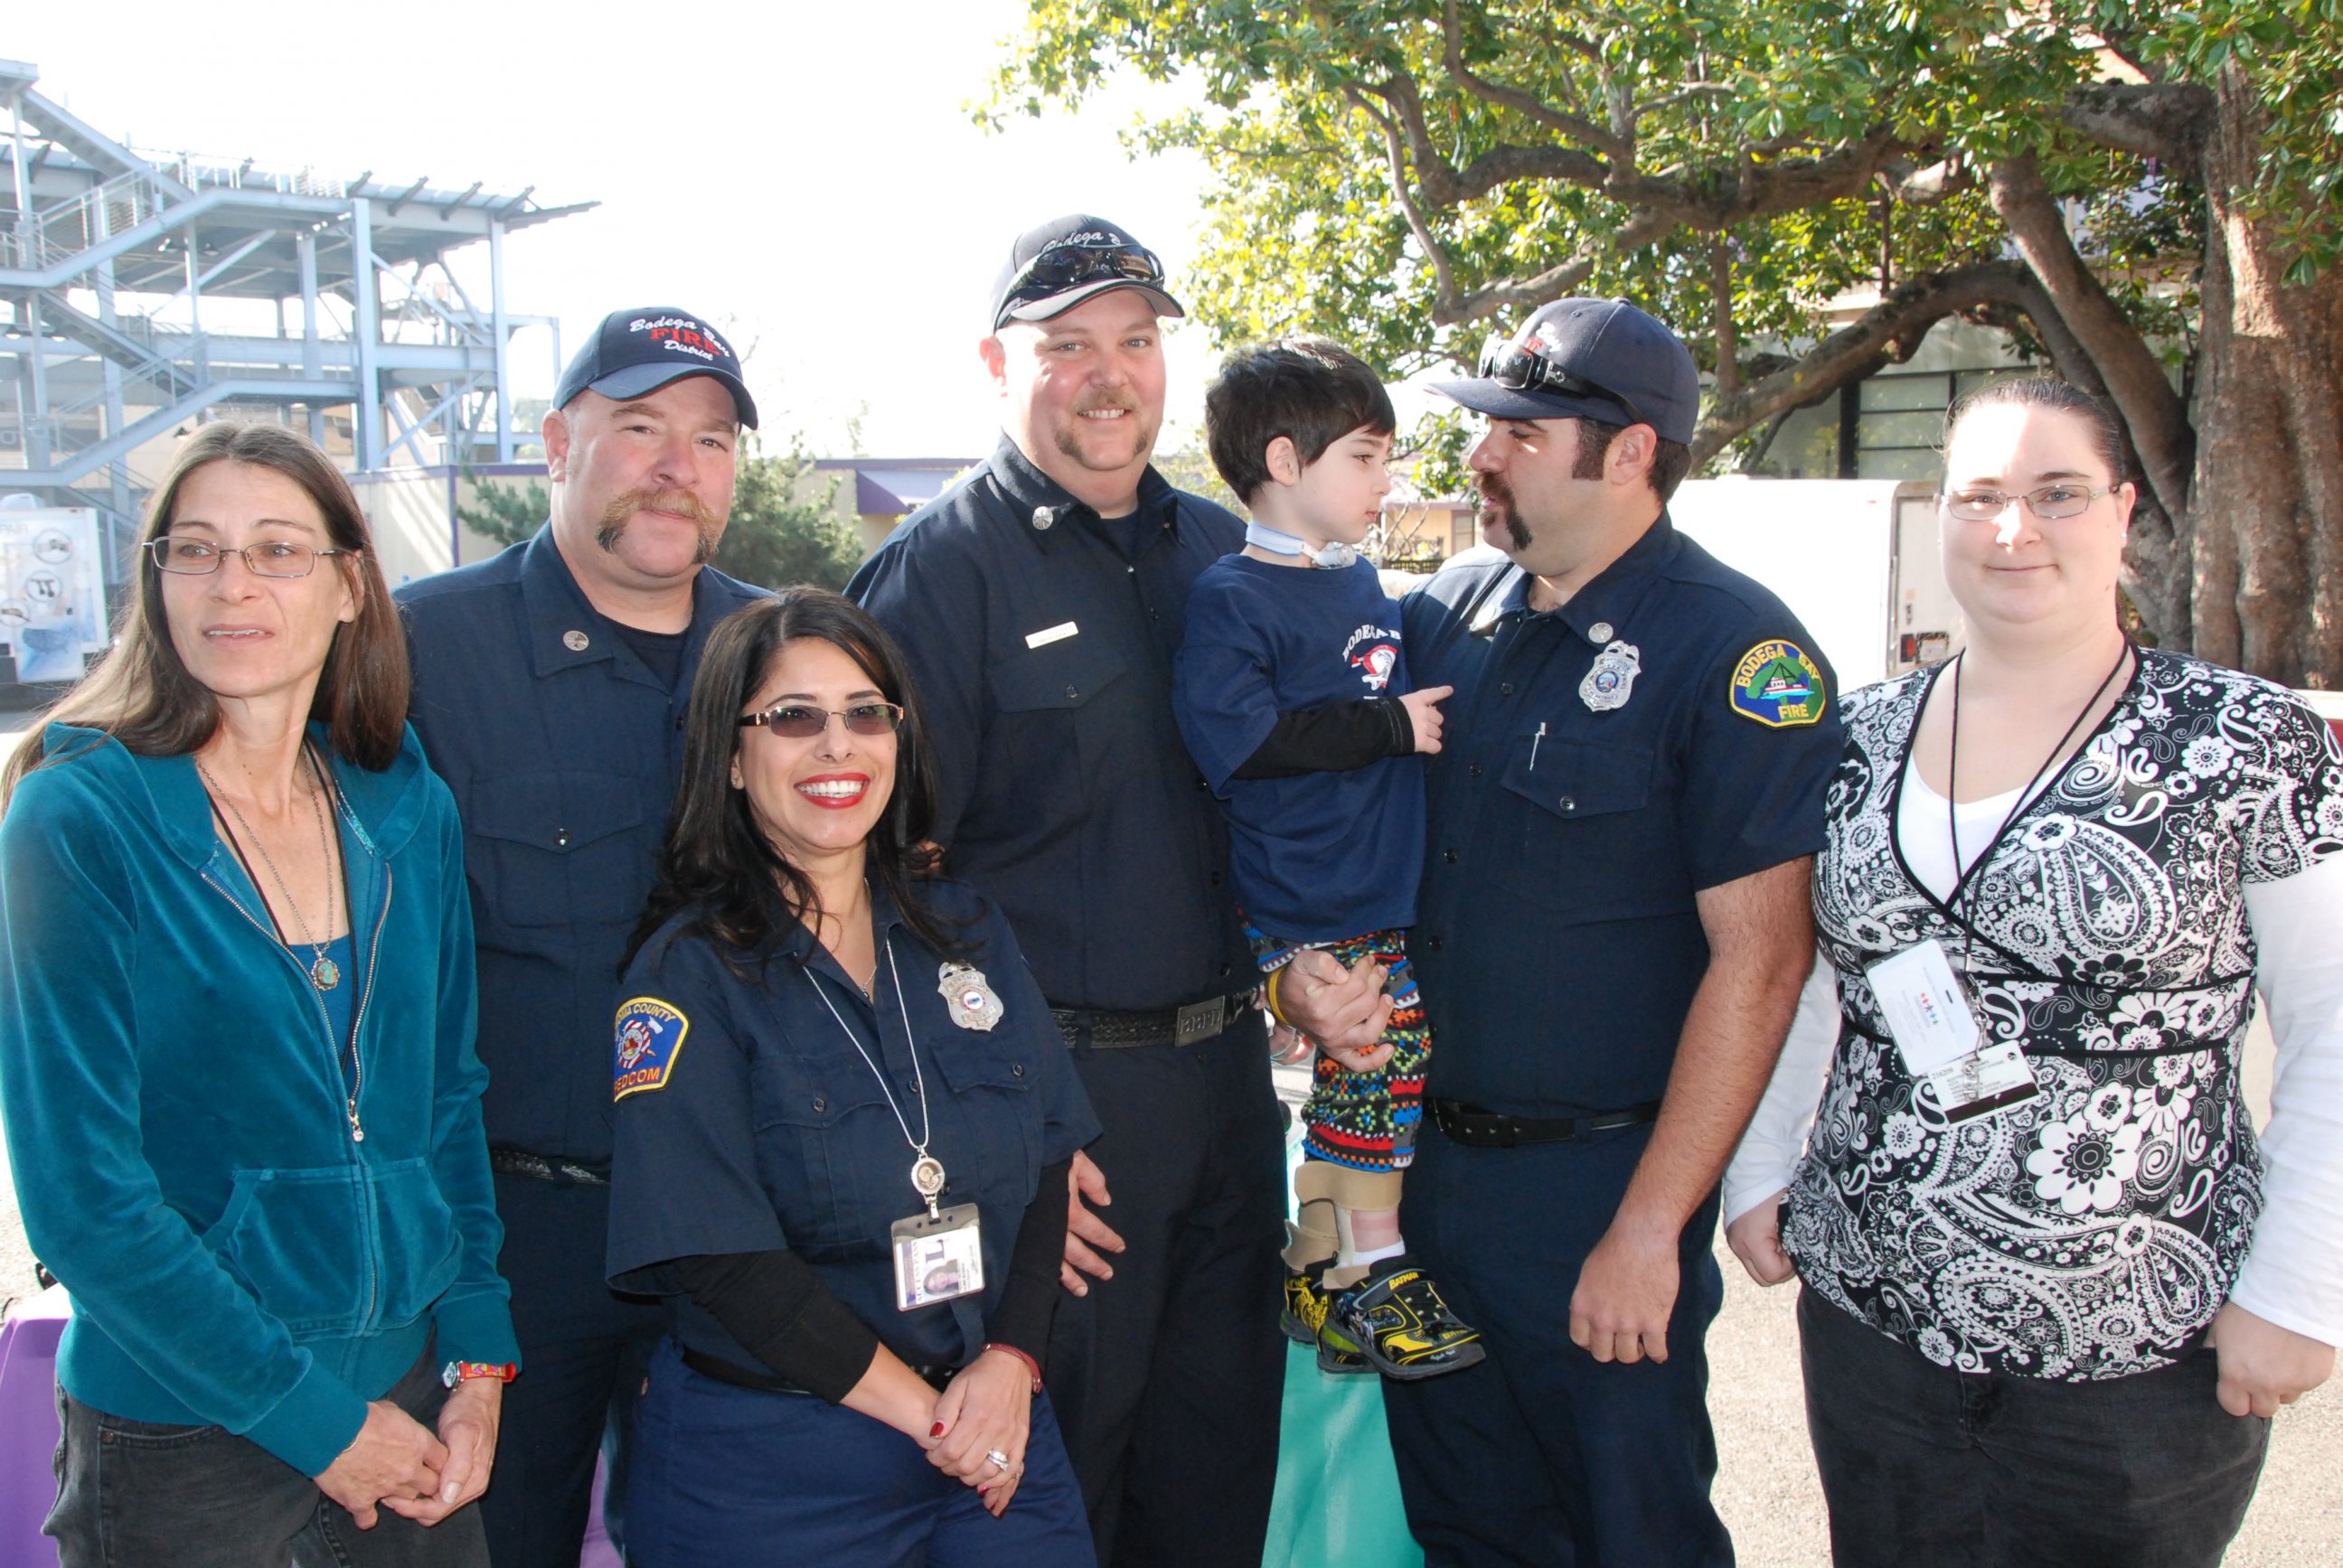 PHOTO: Three months after a 4-year-old Sebastian Johnson's fall off a 225-foot cliff, he has reunited with the hero firefighters who saved his life.